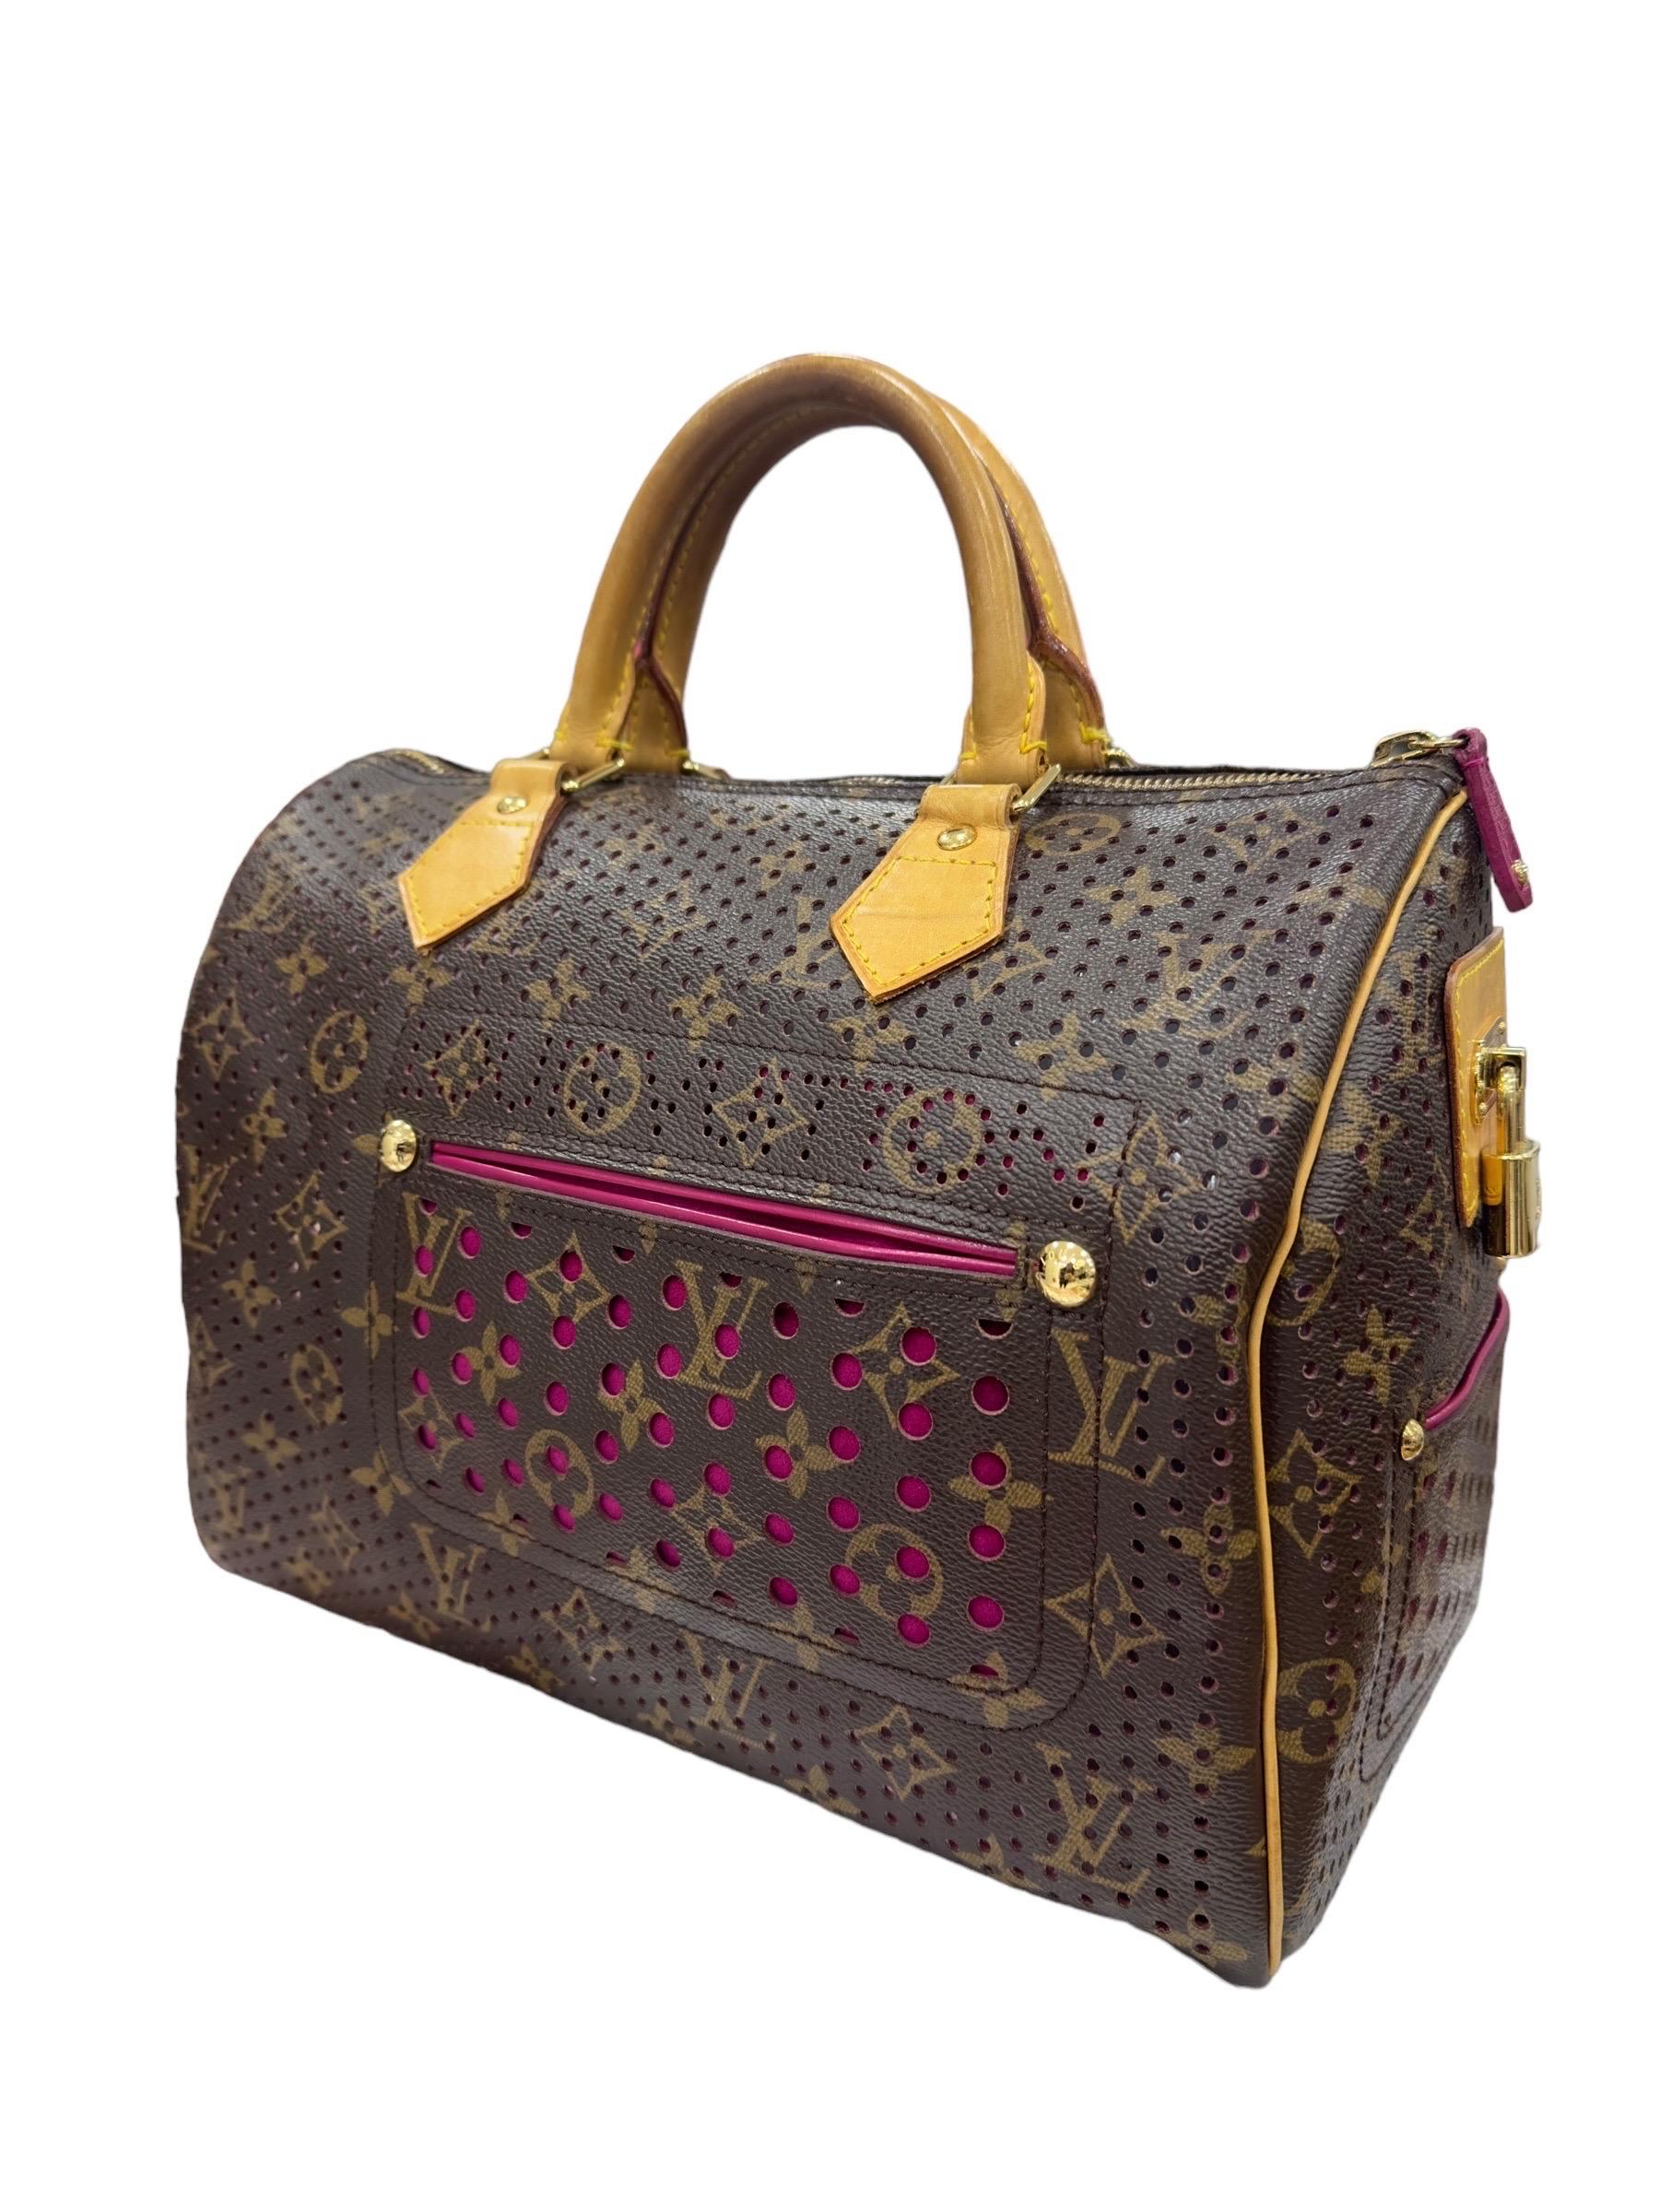 Louis Vuitton Speedy 30 Perforated Rosa Borsa A Mano  In Excellent Condition For Sale In Torre Del Greco, IT